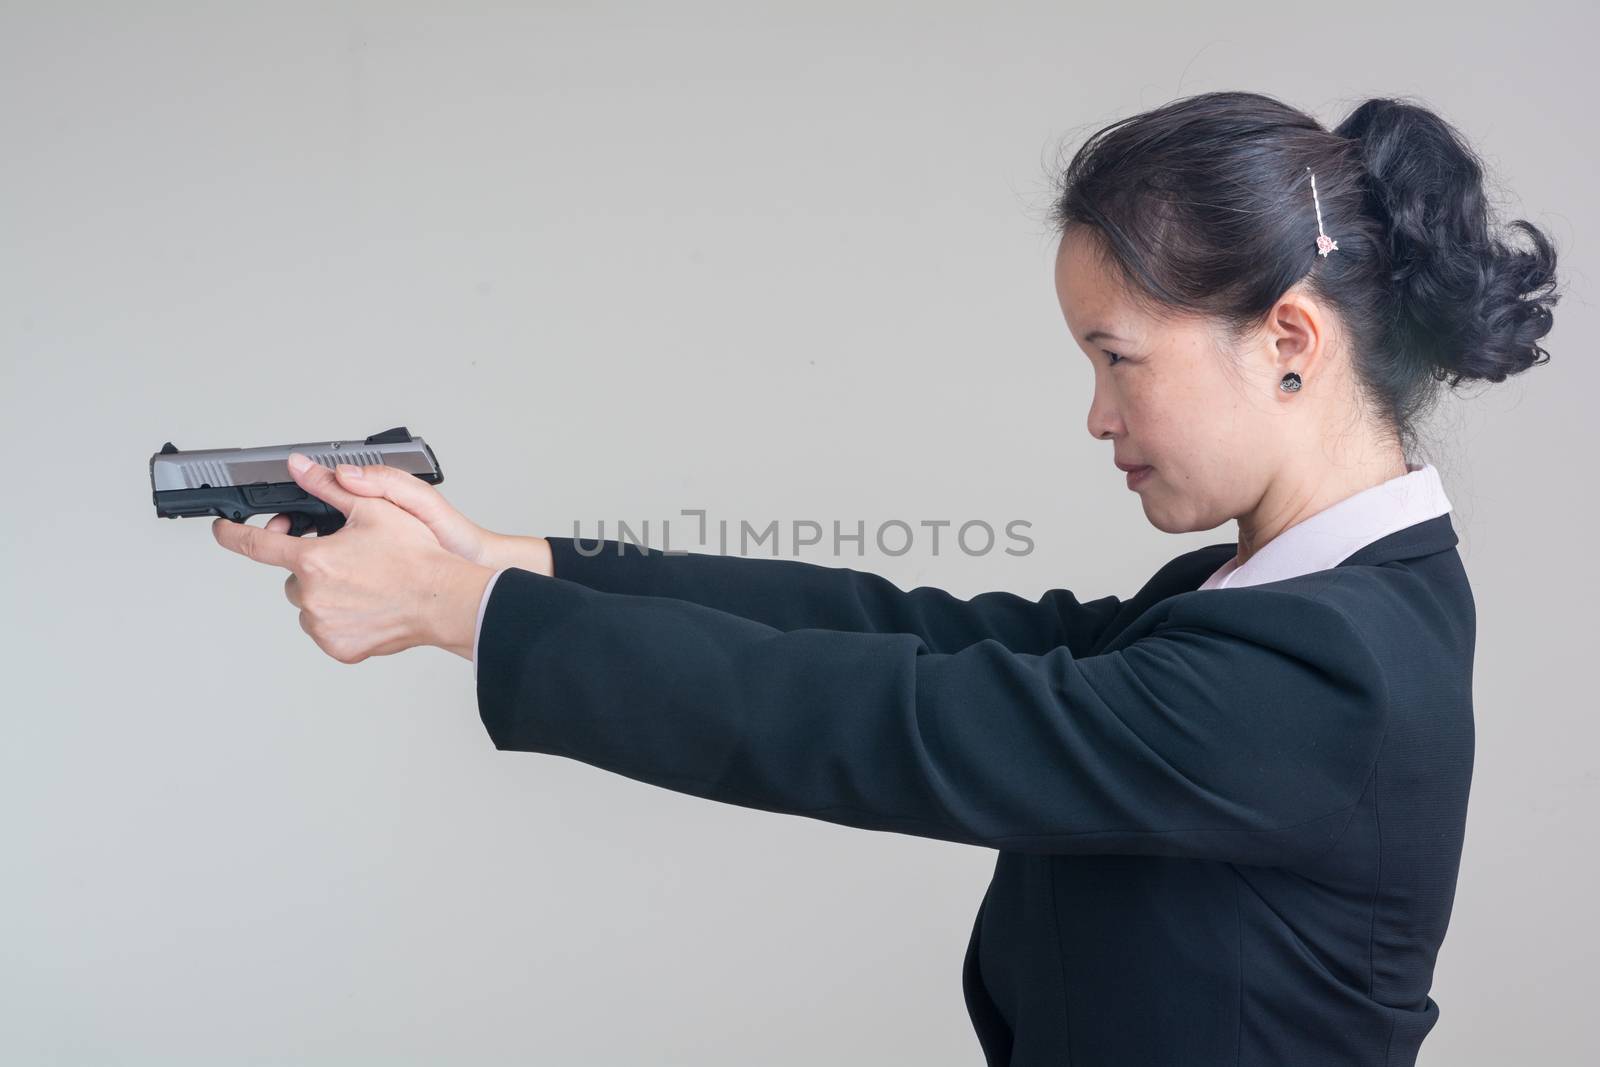 Portrait of woman in business suit aiming a hand gun on grey background